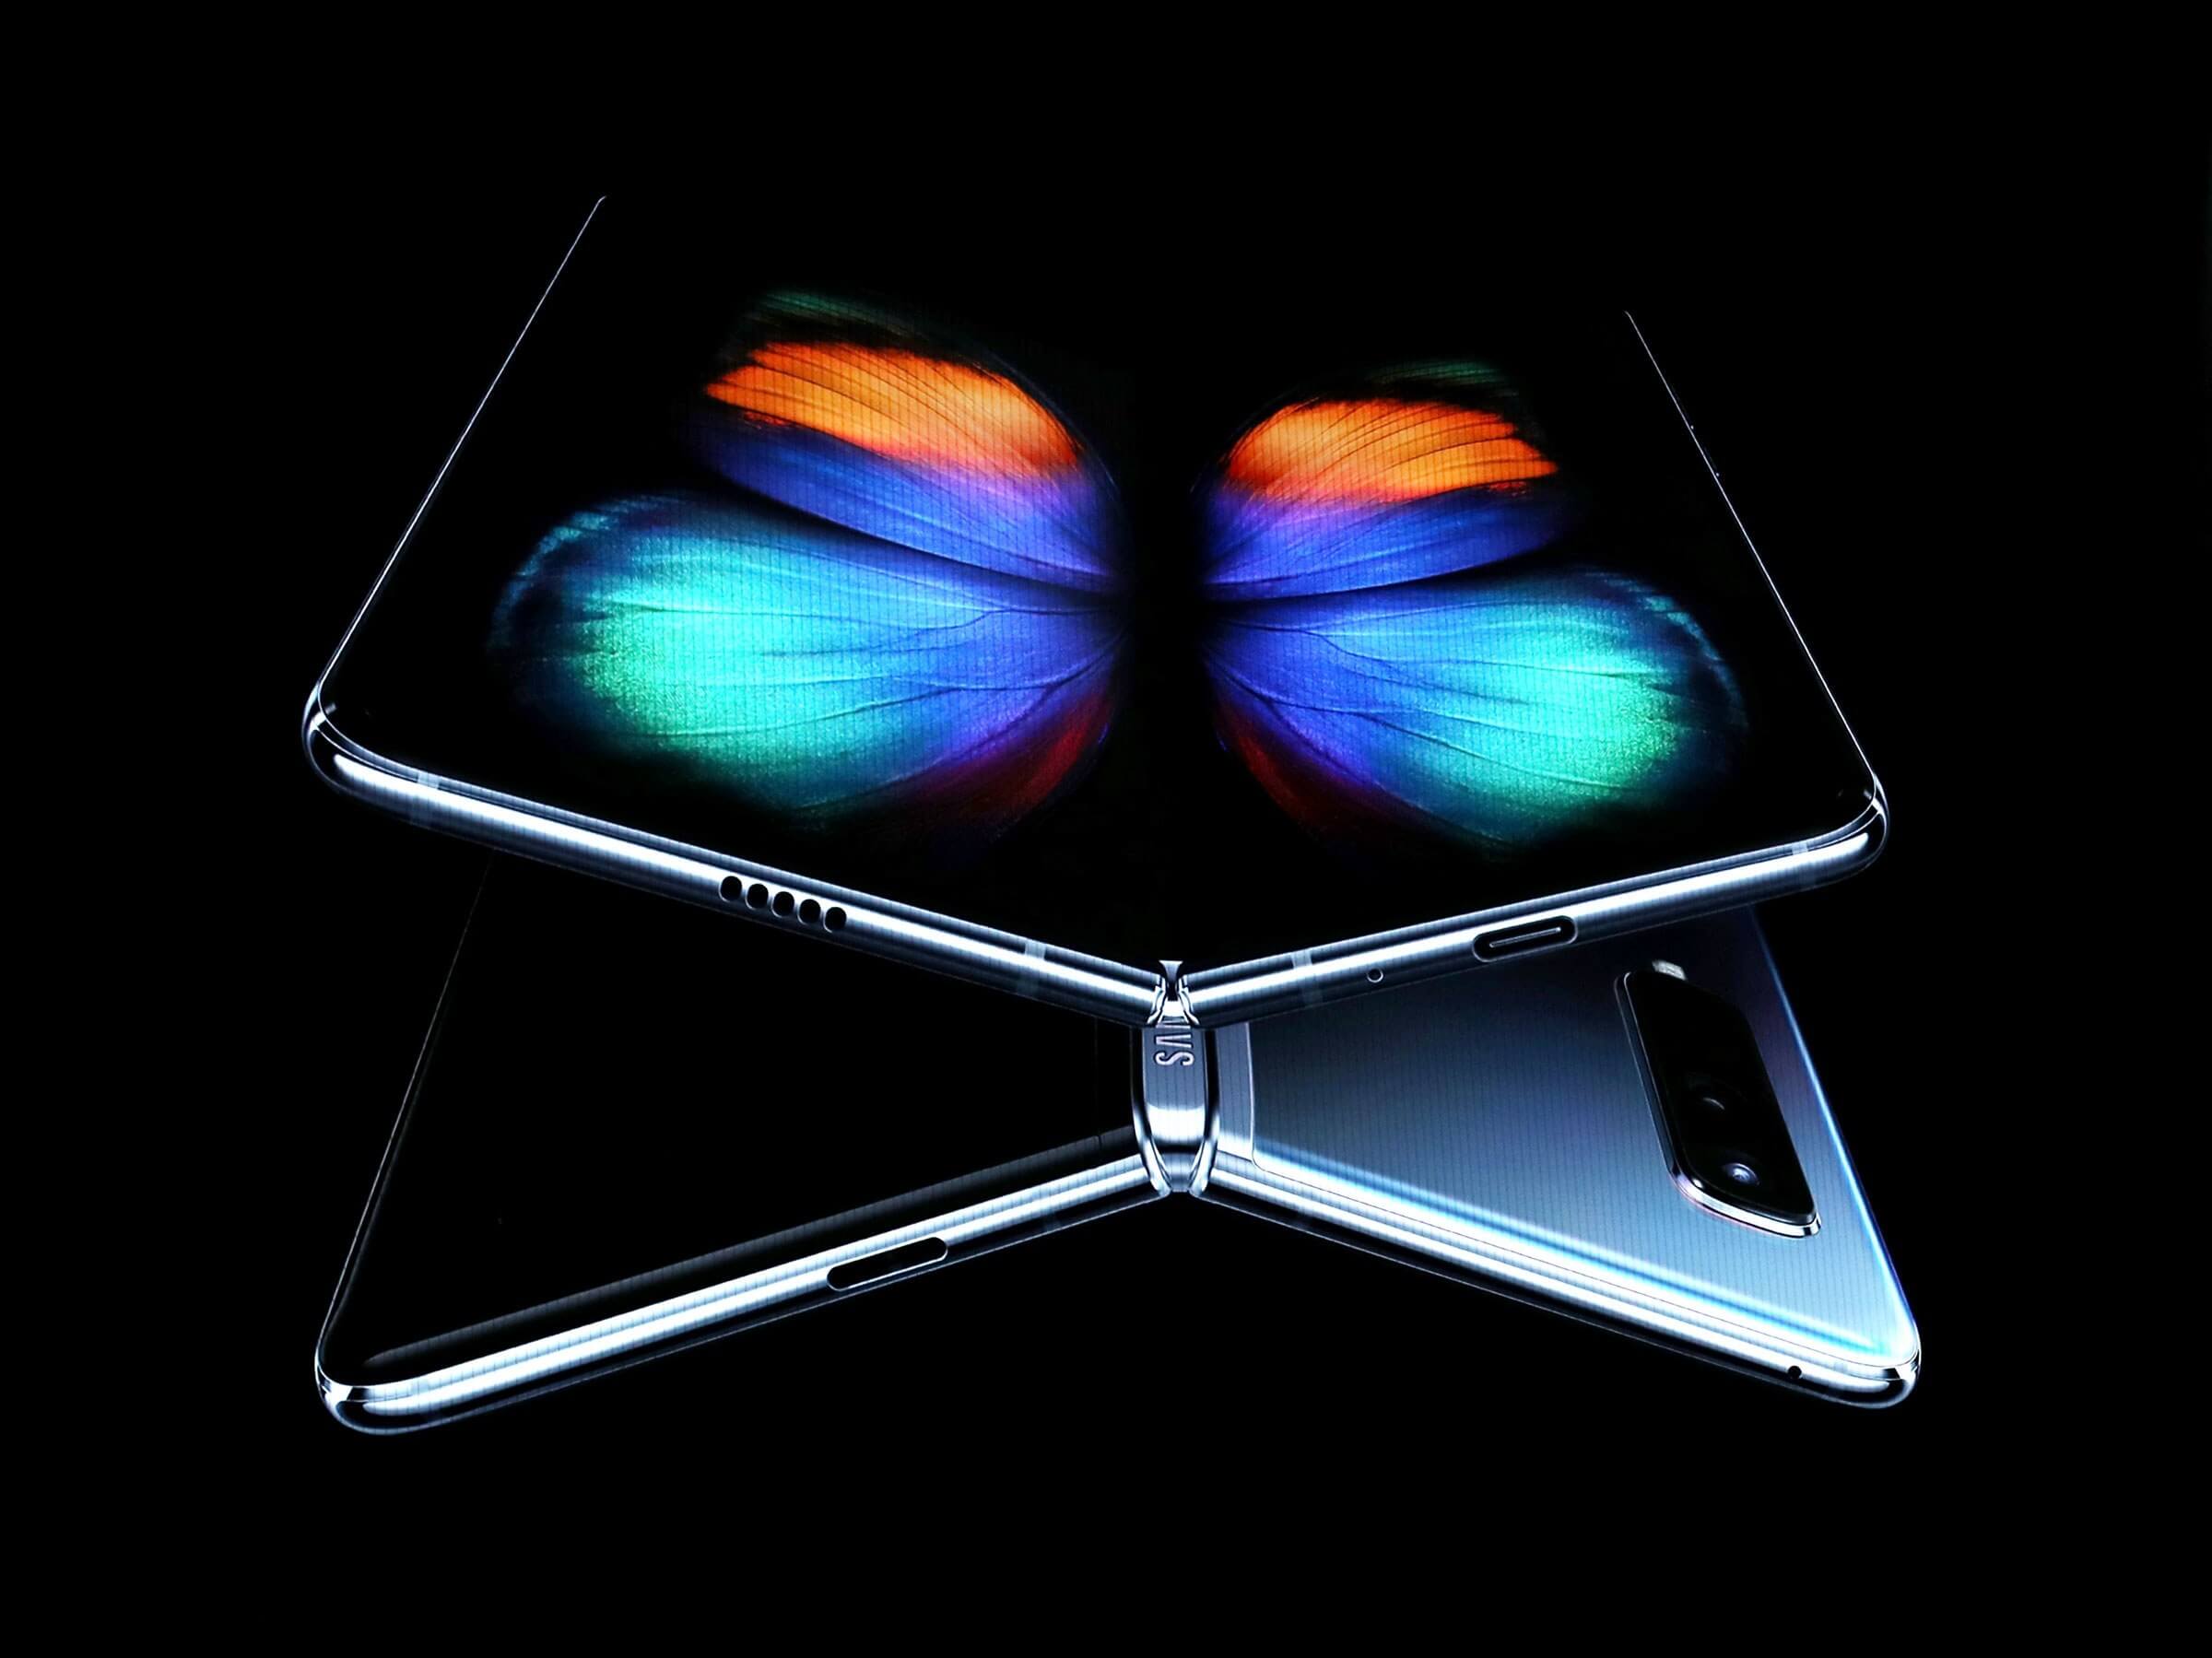 Samsung asks customers if they want to keep their Galaxy Fold orders, still no shipping date for troubled device